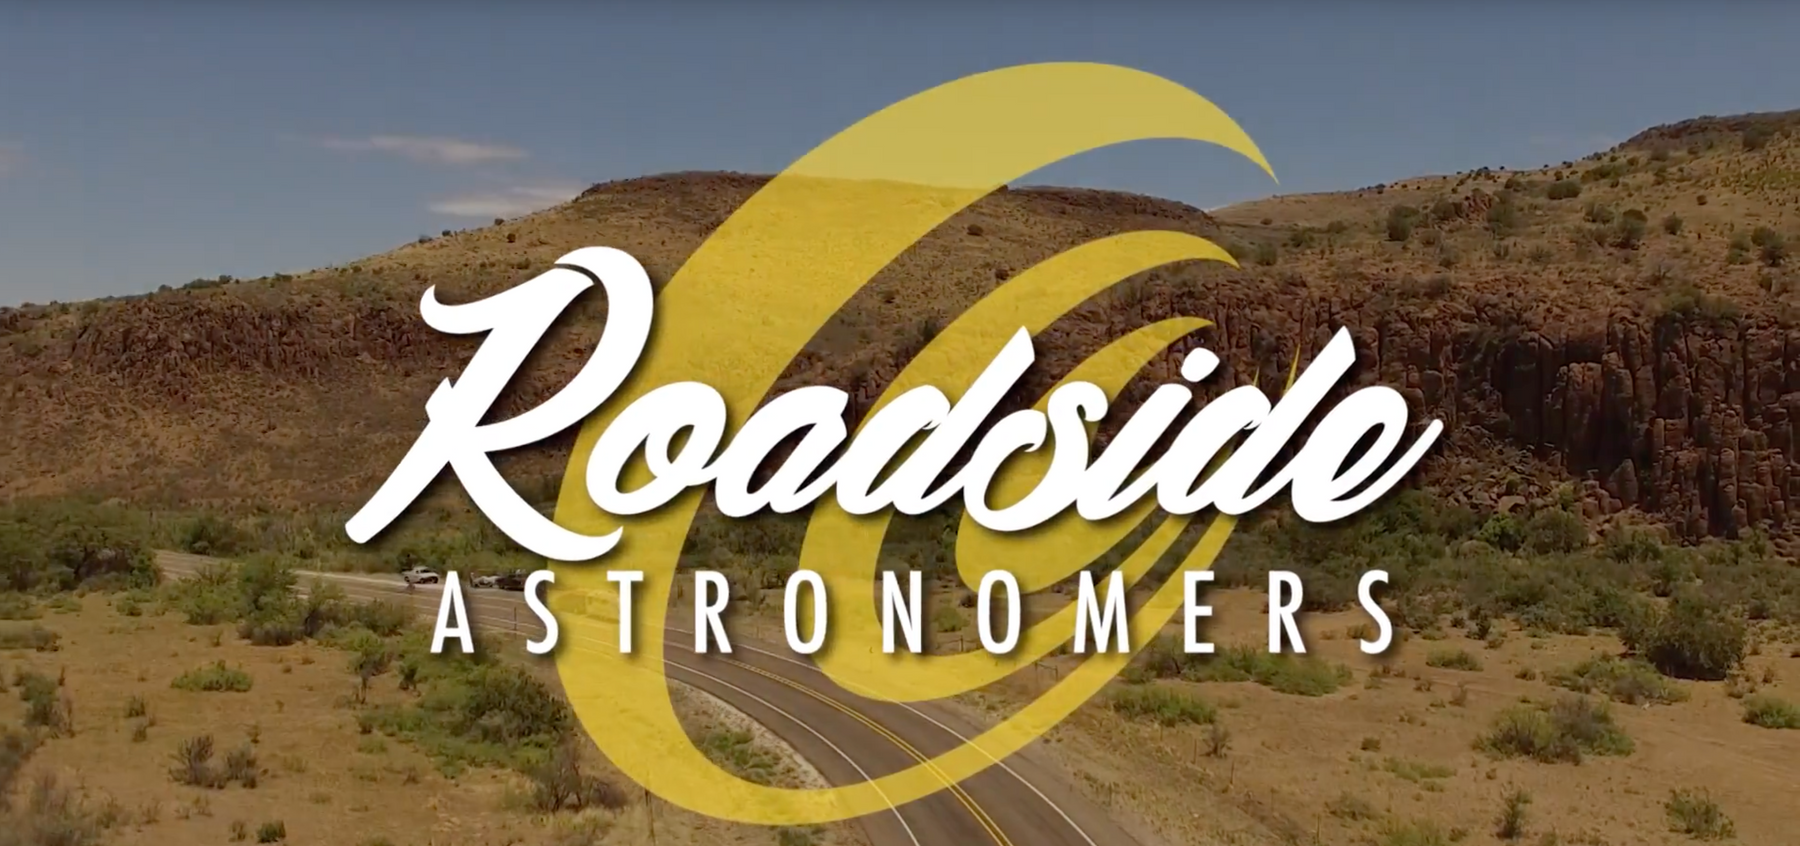 Roadside Astronomers - Recap of Greg and Scott's travels - Episode TWO